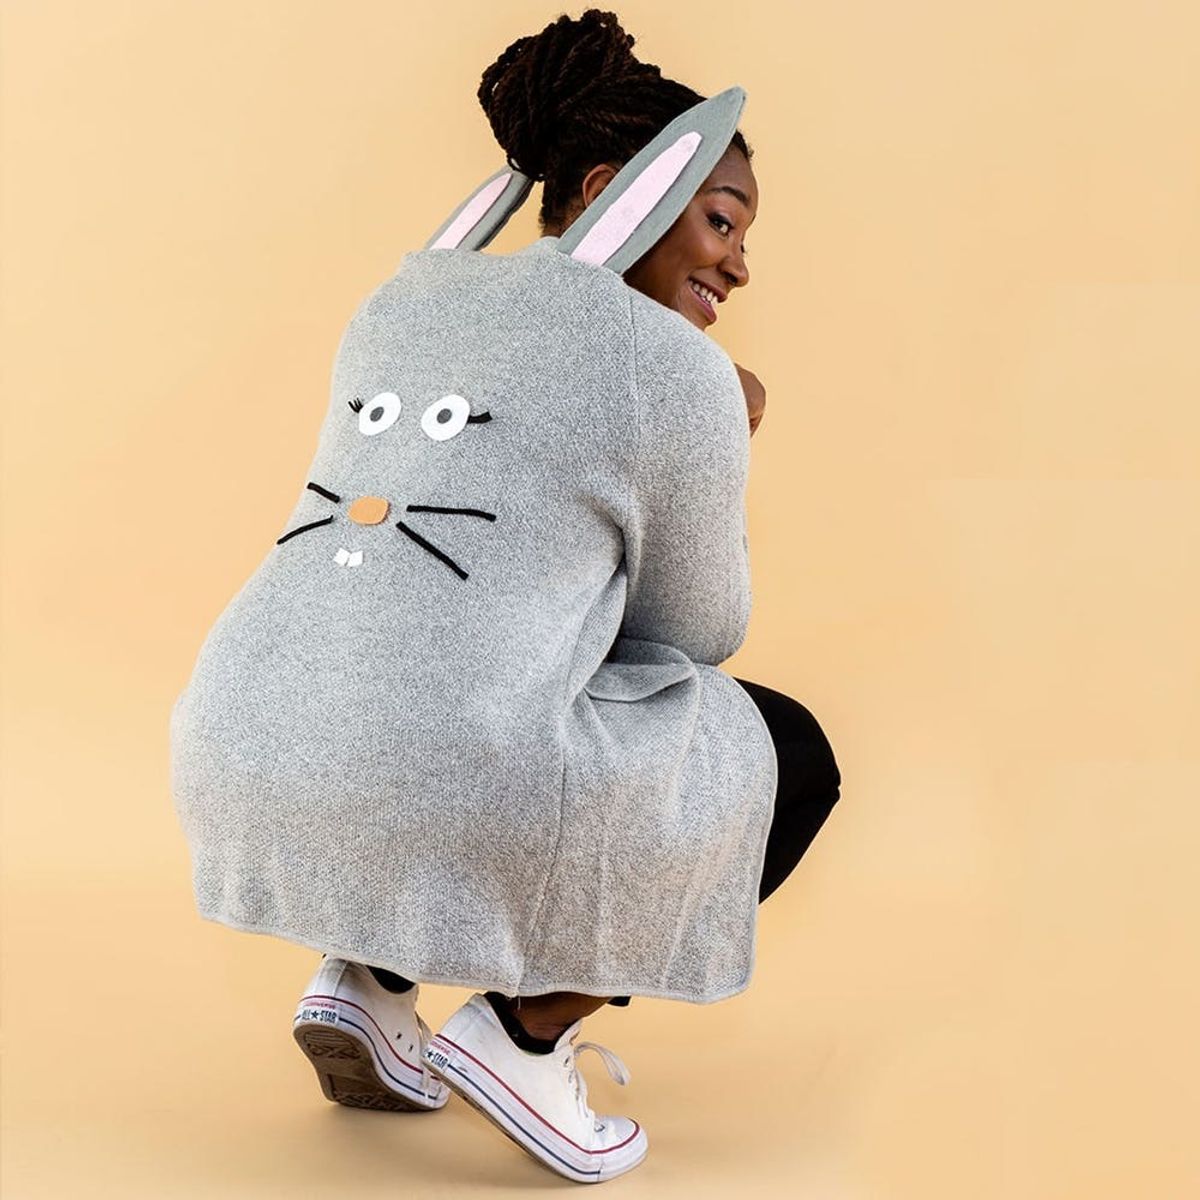 Hop Your Way Through Halloween With This Simple Bunny Costume